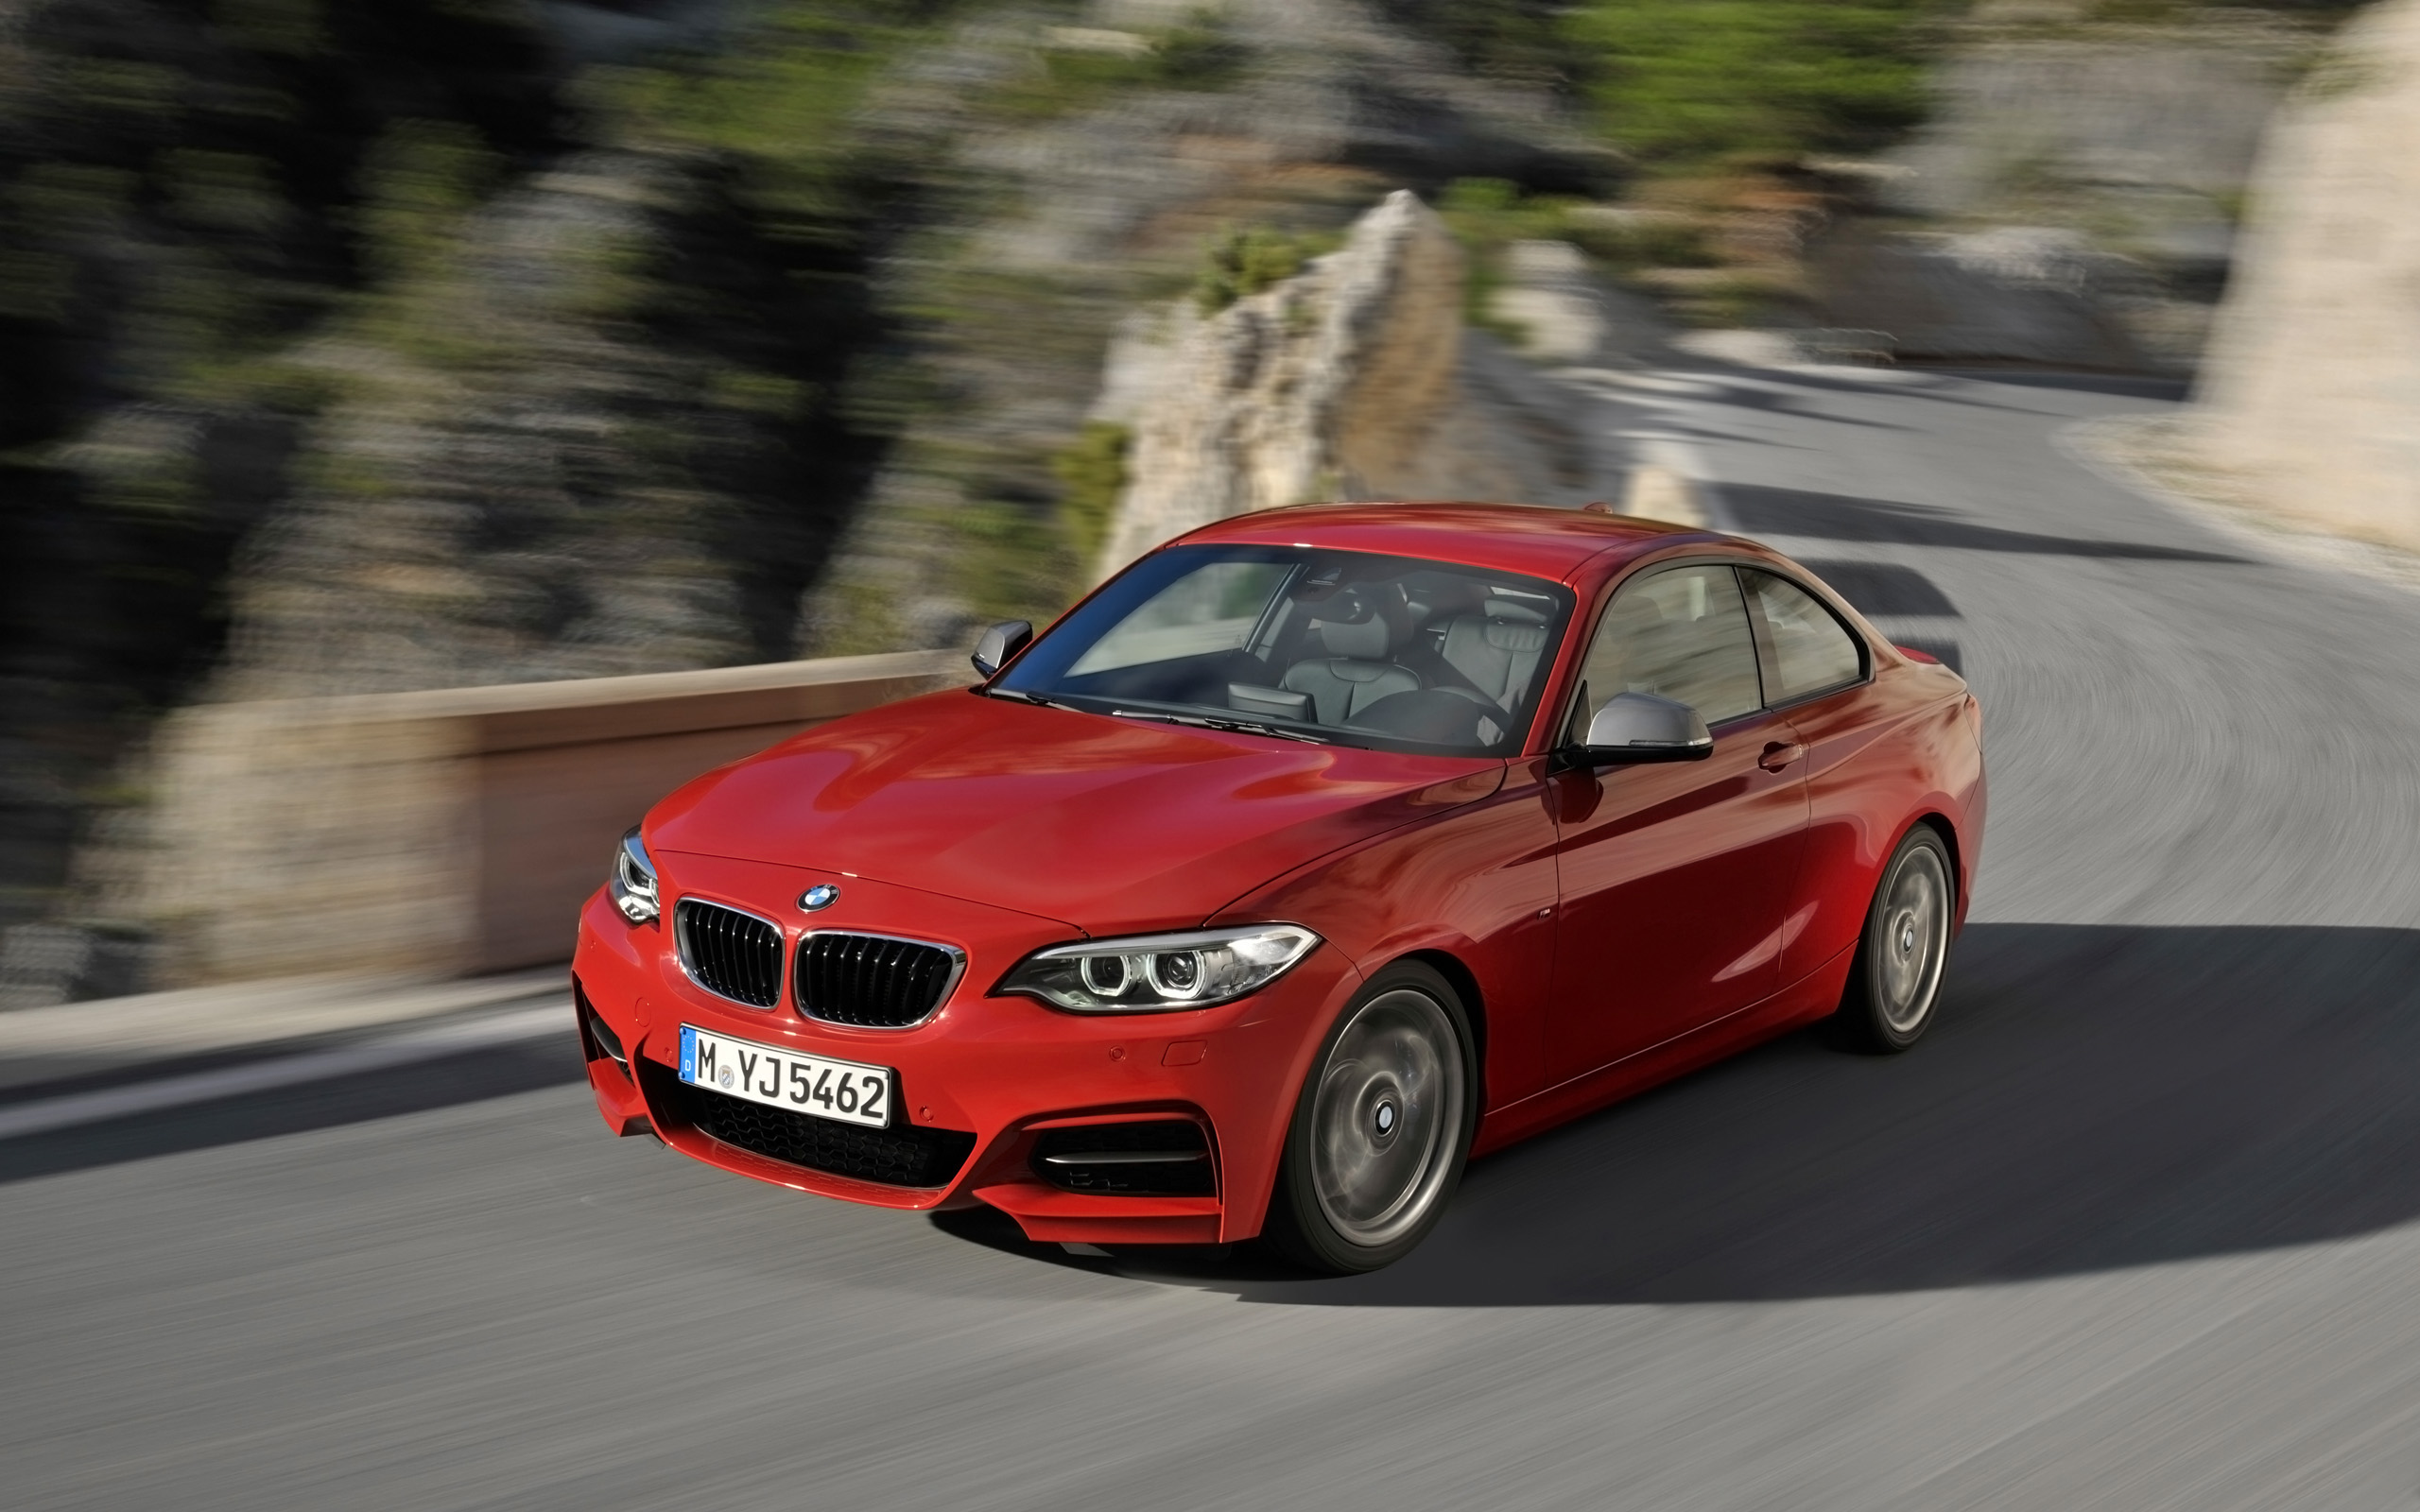 2014, Bmw, 2 series, Coupe, Jf Wallpaper